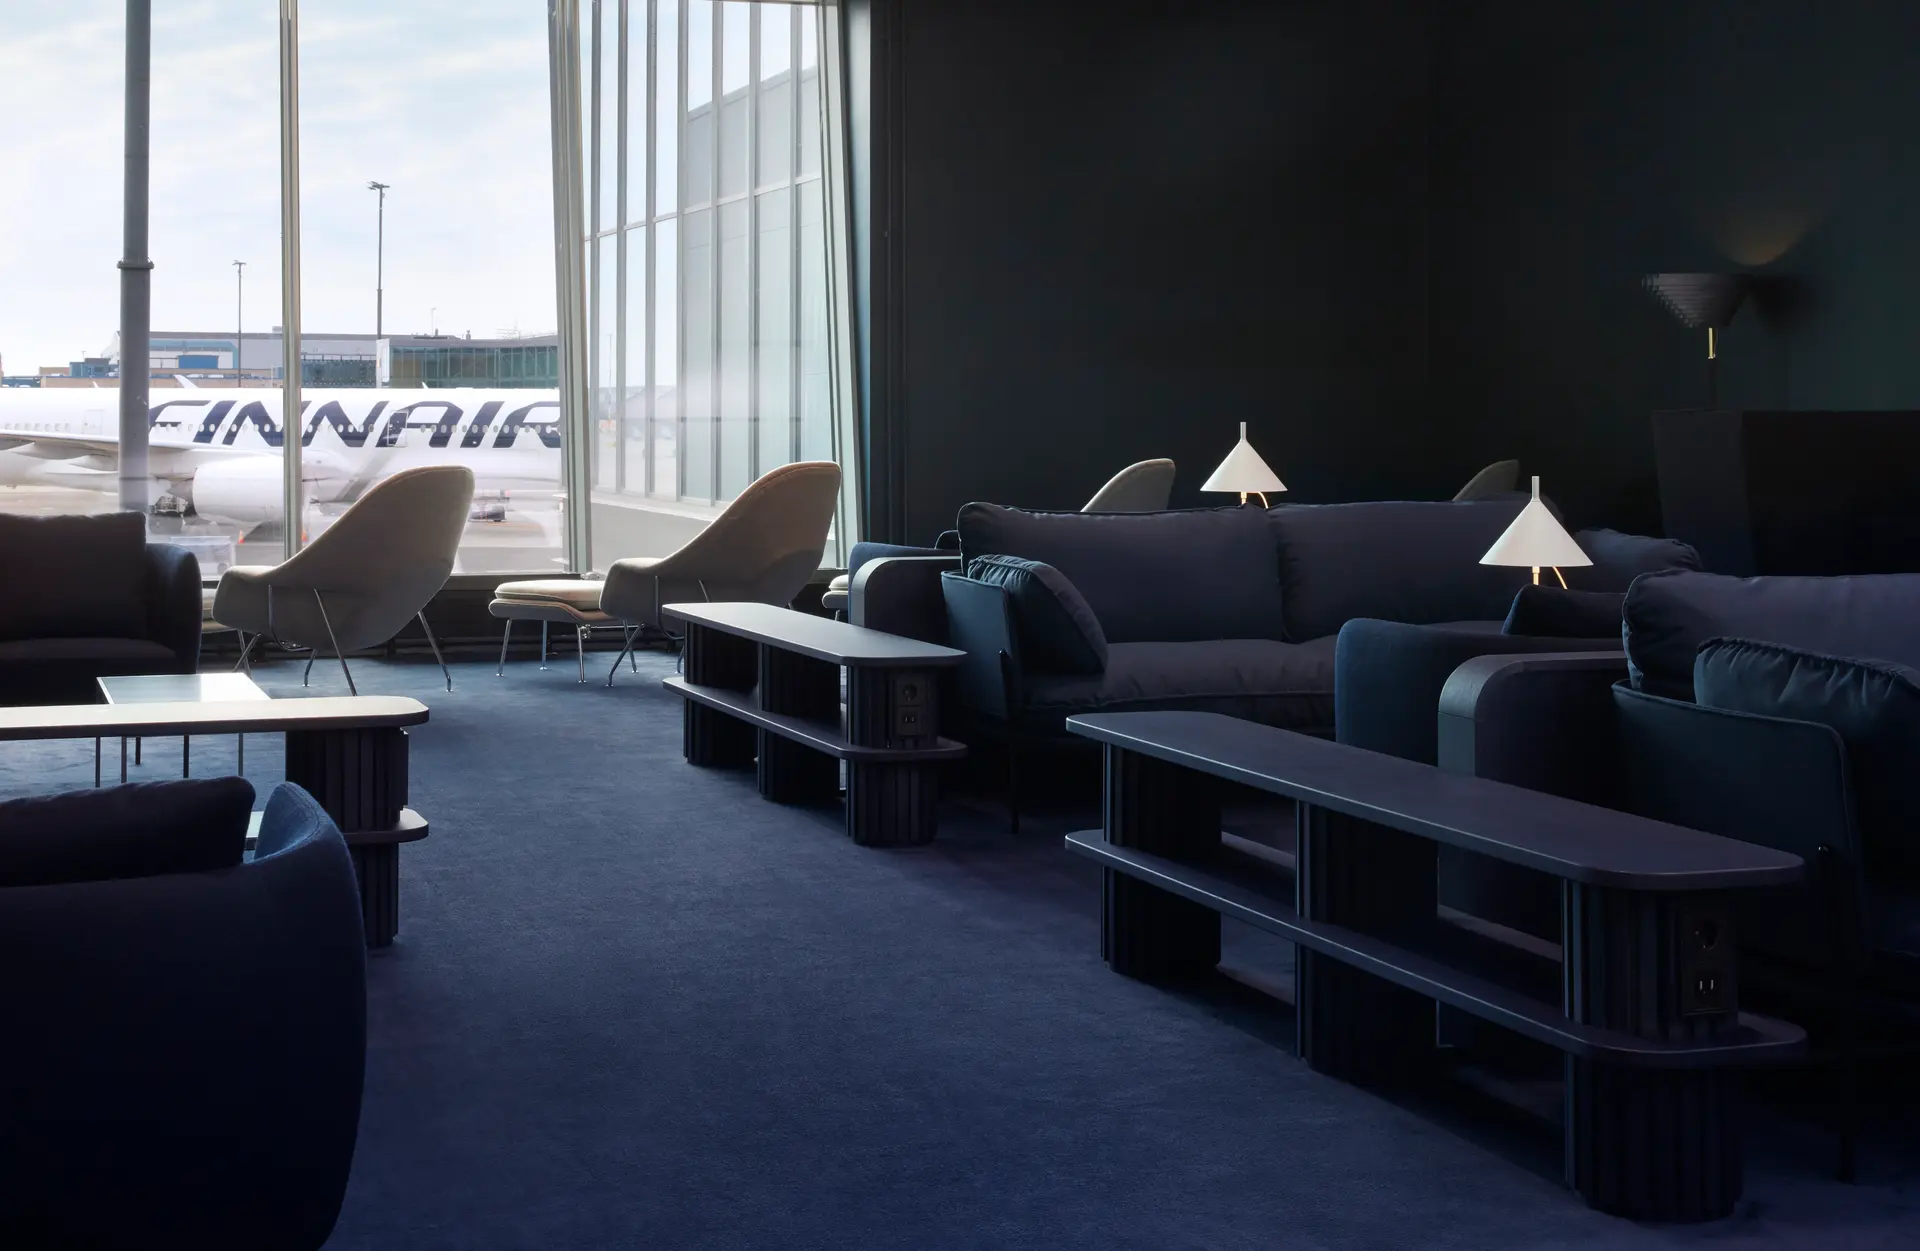 Airline review Airport experience - Finnair - 4